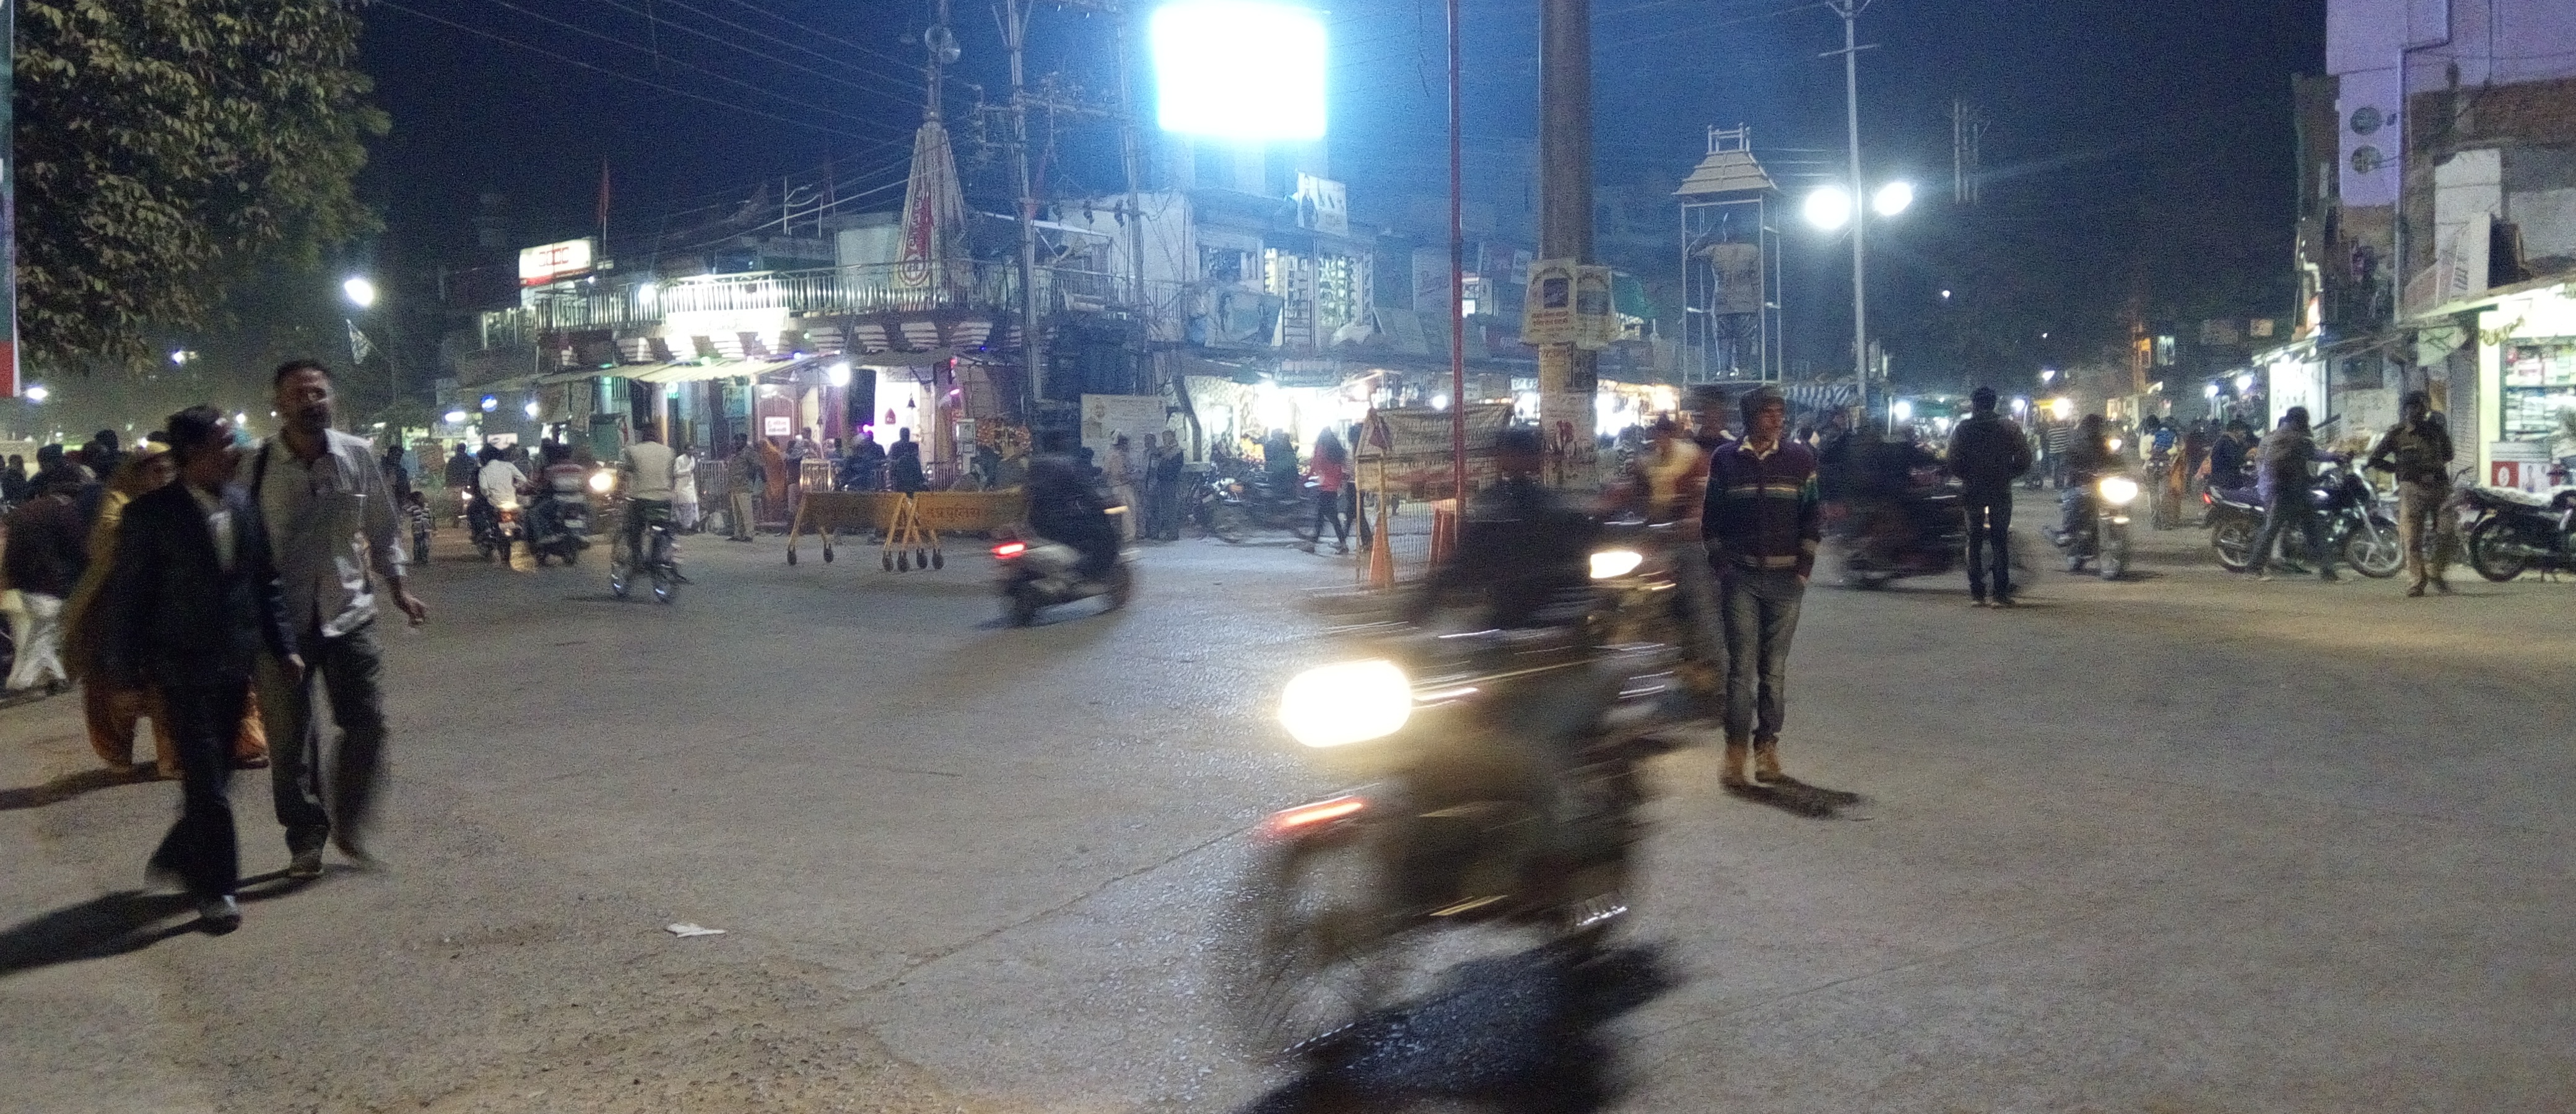 A routine scene at Mangalwara Chowk with the statue of Subhash Chandra Bose in the backdrop. 